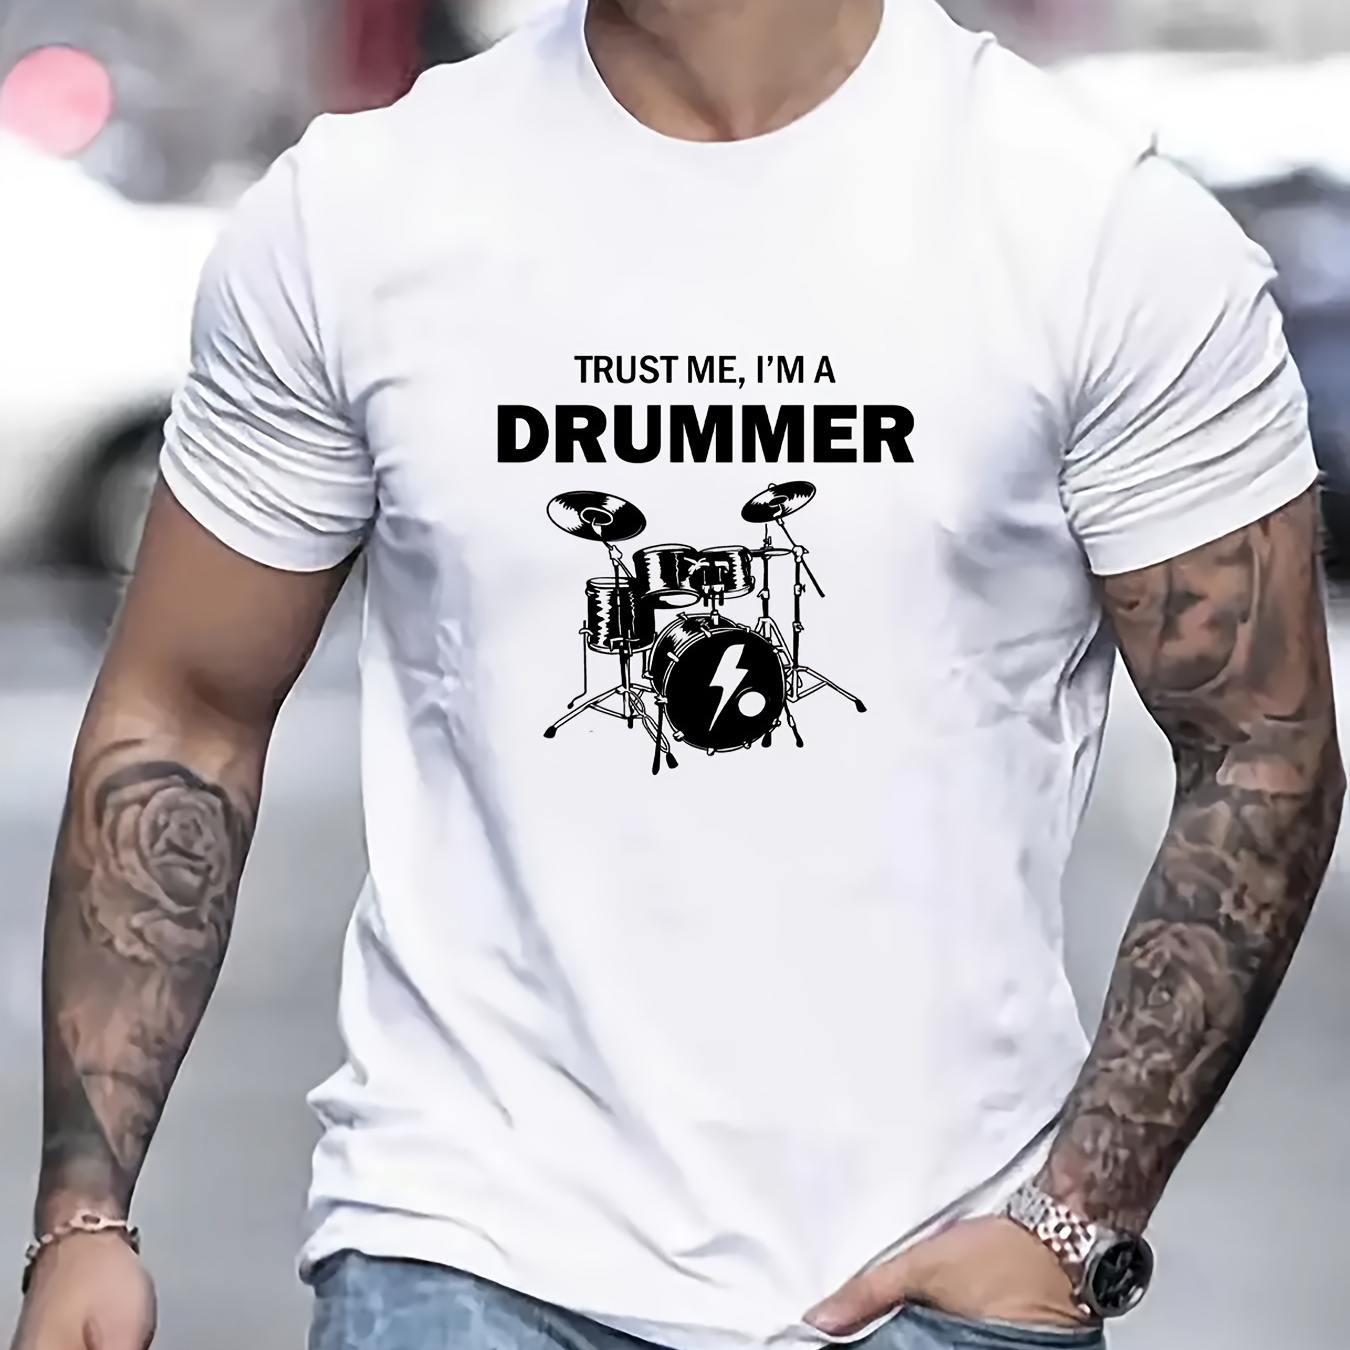 

I'm A Drummer Print T Shirt, Tees For Men, Casual Short Sleeve T-shirt For Summer